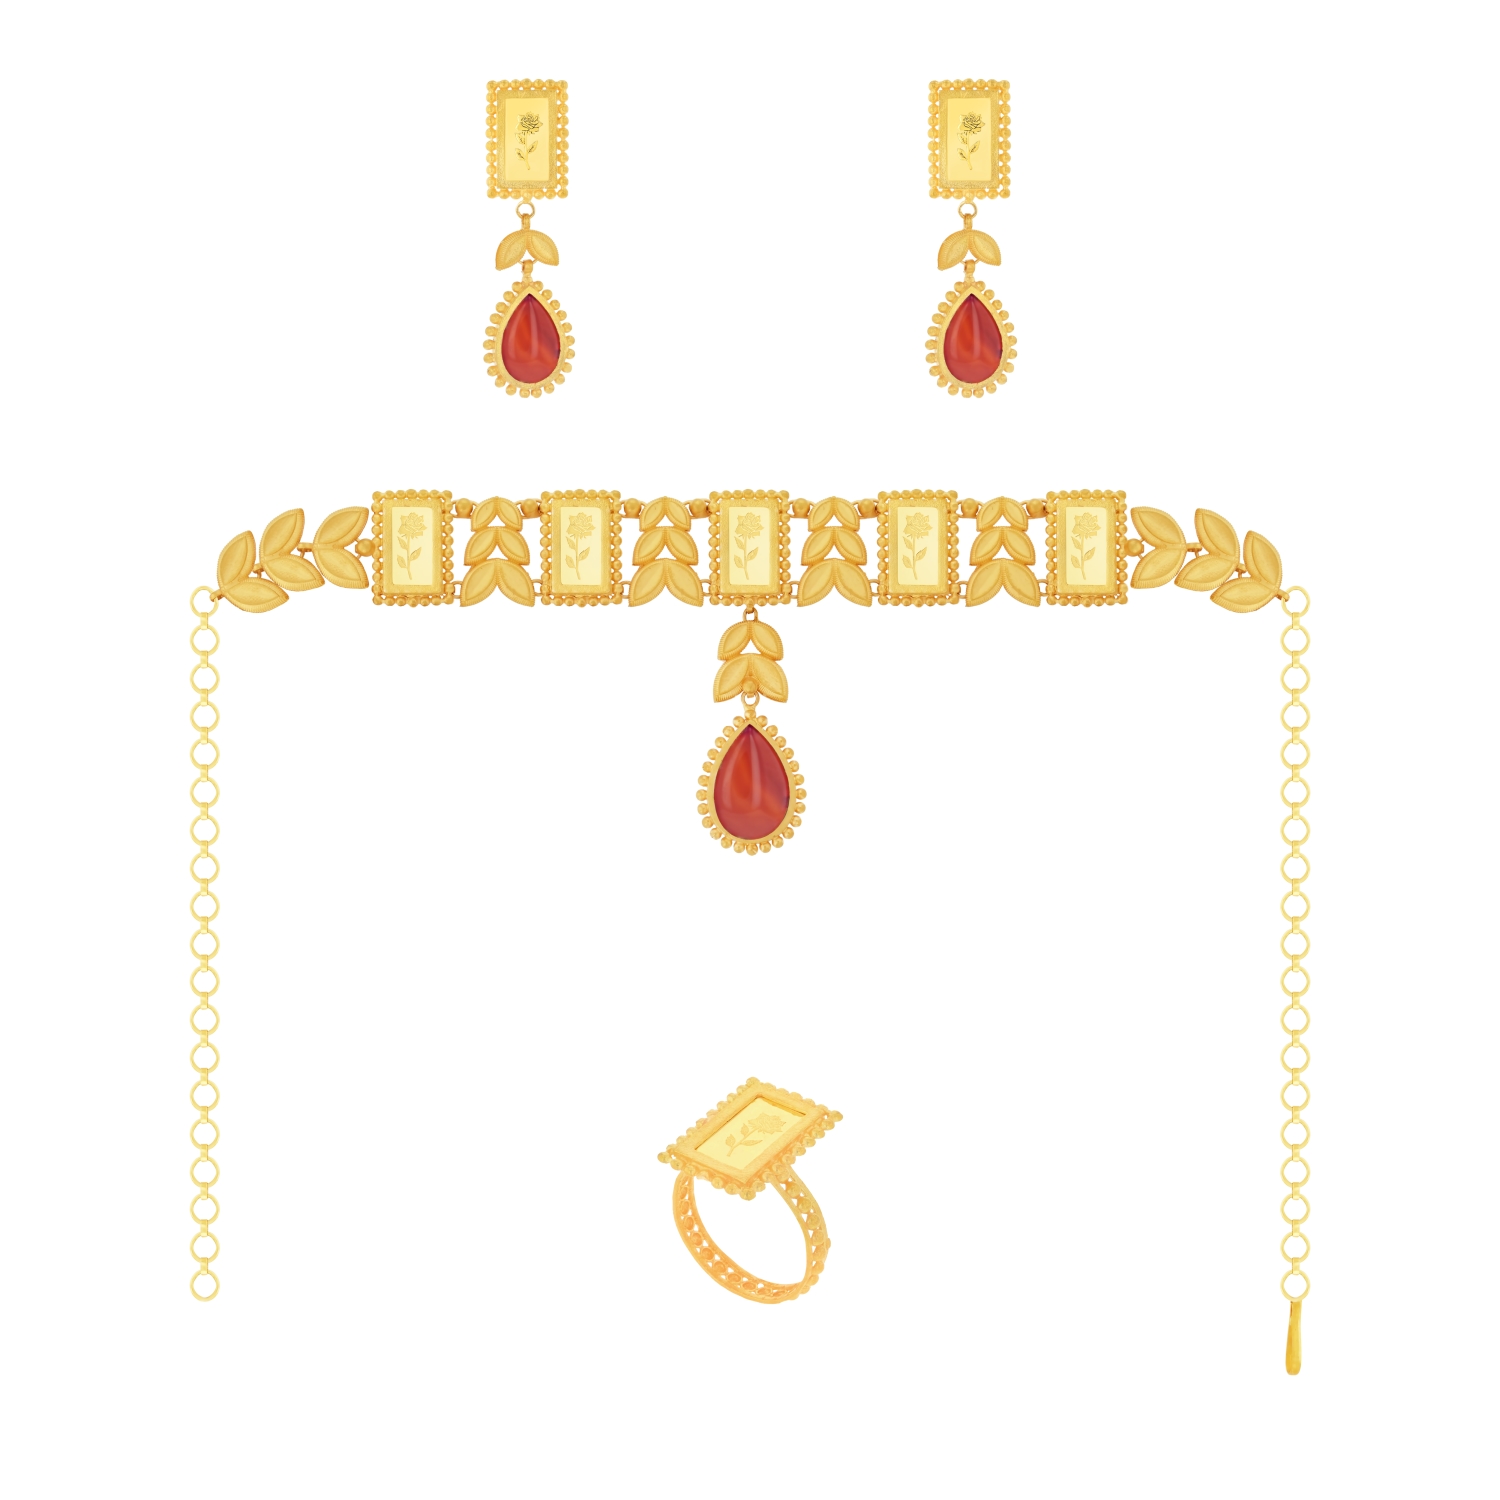 21K Traditional Gold Choker Set With 24K Gold Bars